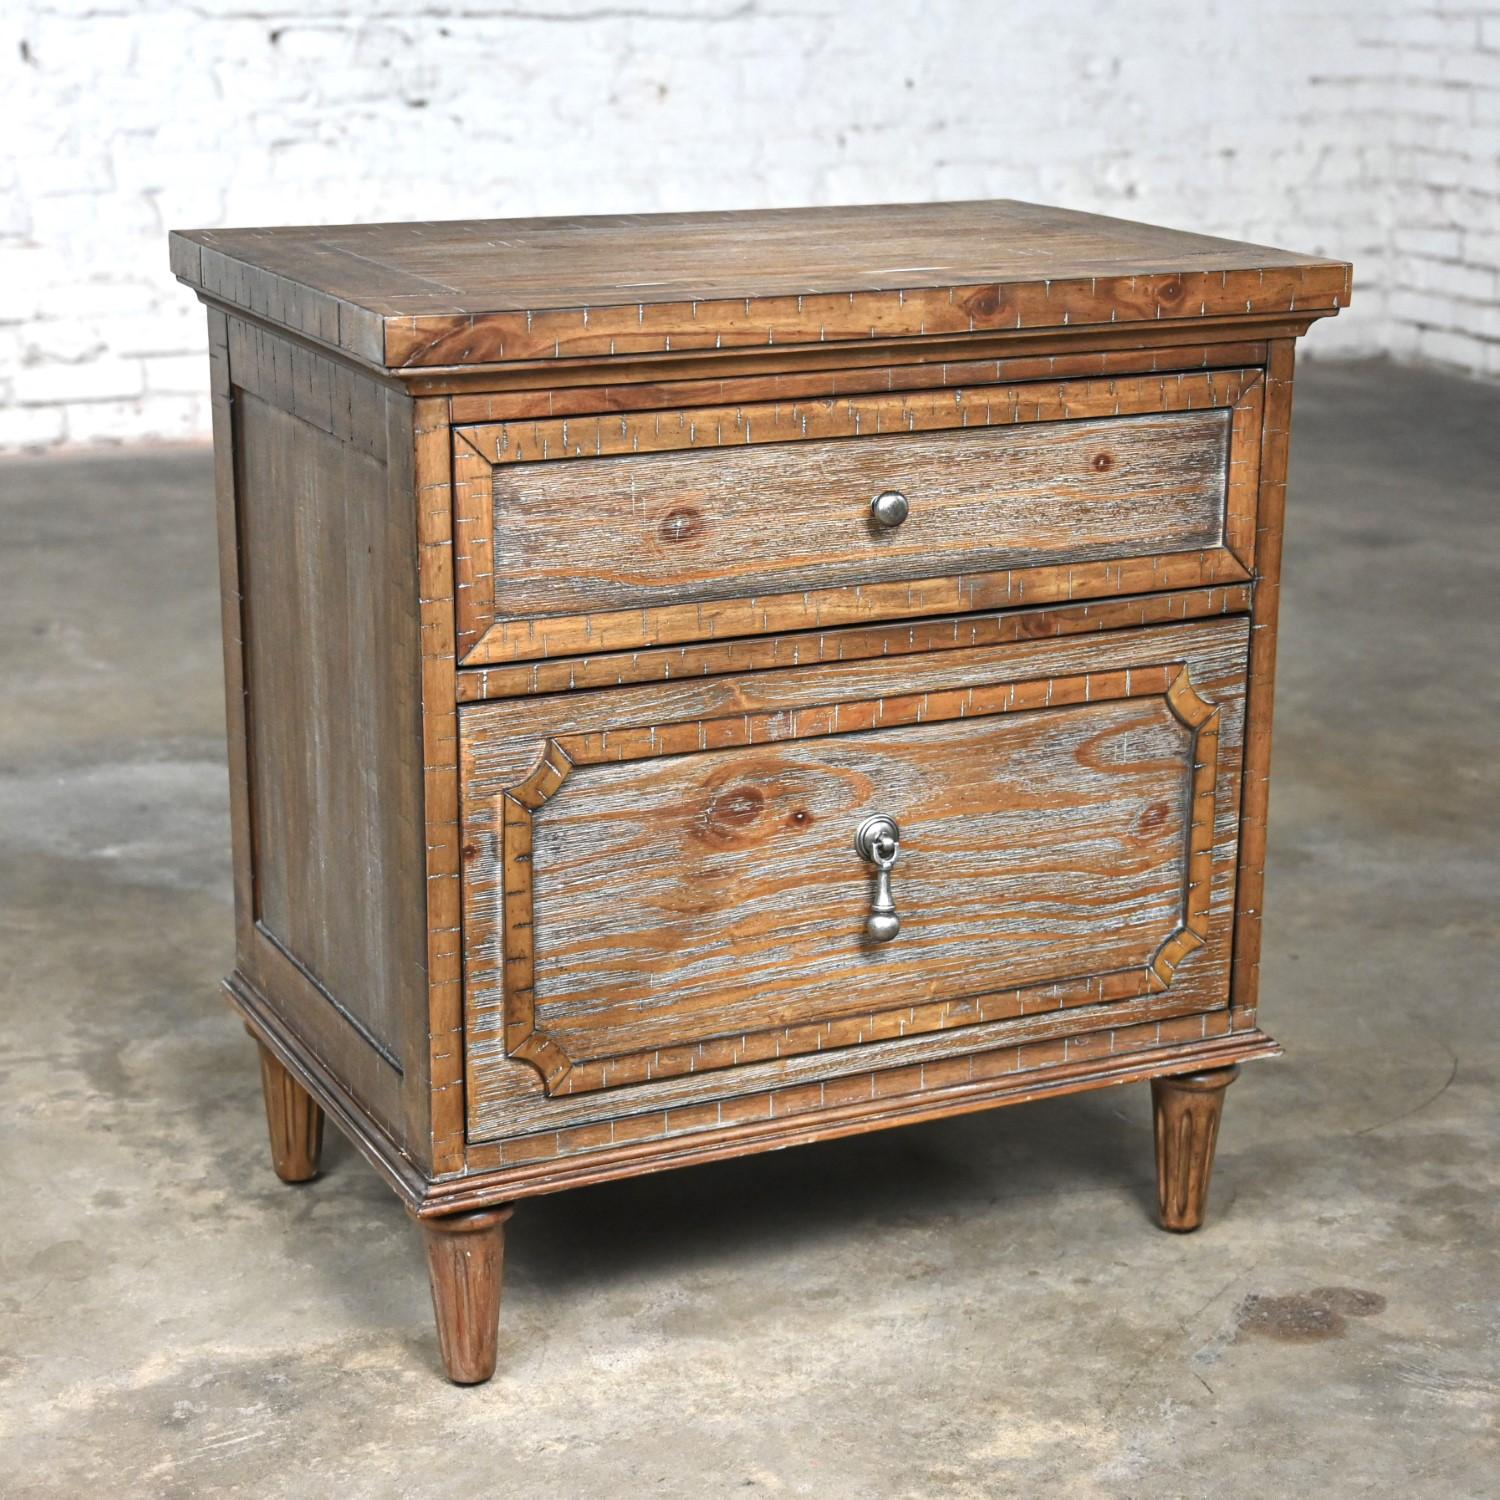 Handsome Early 21st Century Modern French Country Rustic mahogany nightstand, end table, or small cabinet with two drawers with metal hardware and USB Port and electrical outlets. Beautiful condition, keeping in mind that this is vintage and not new